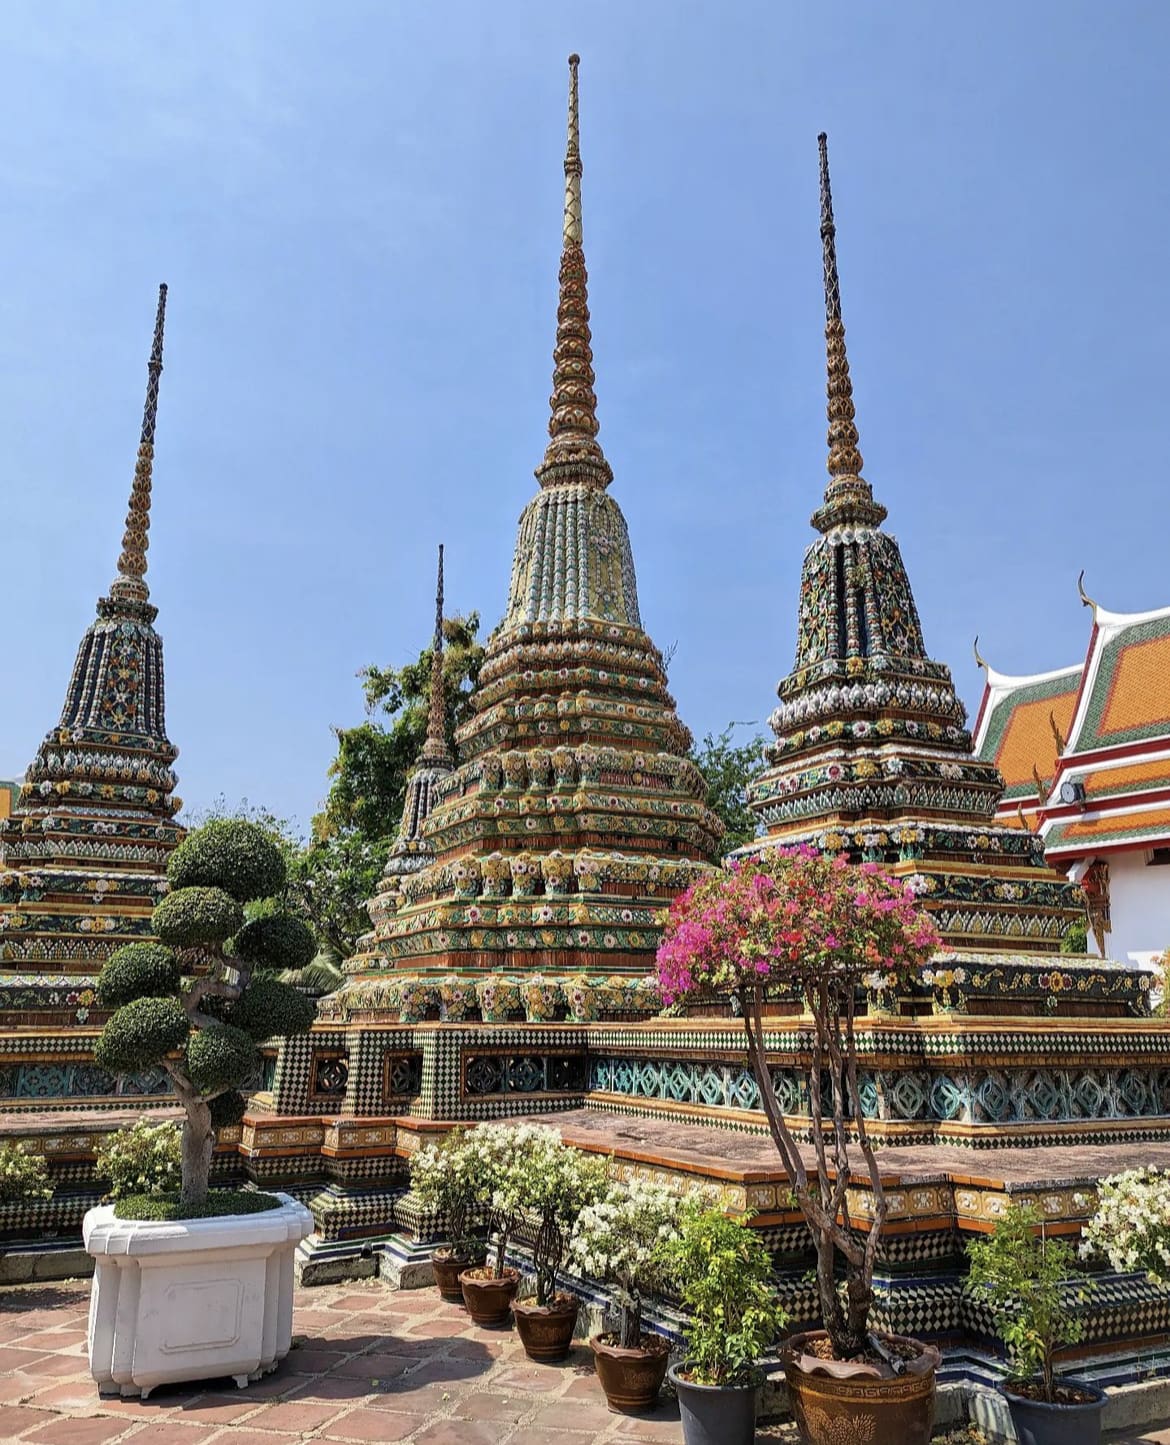 Wat Pho - The 20 Best Things to Do in Bangkok, Thailand